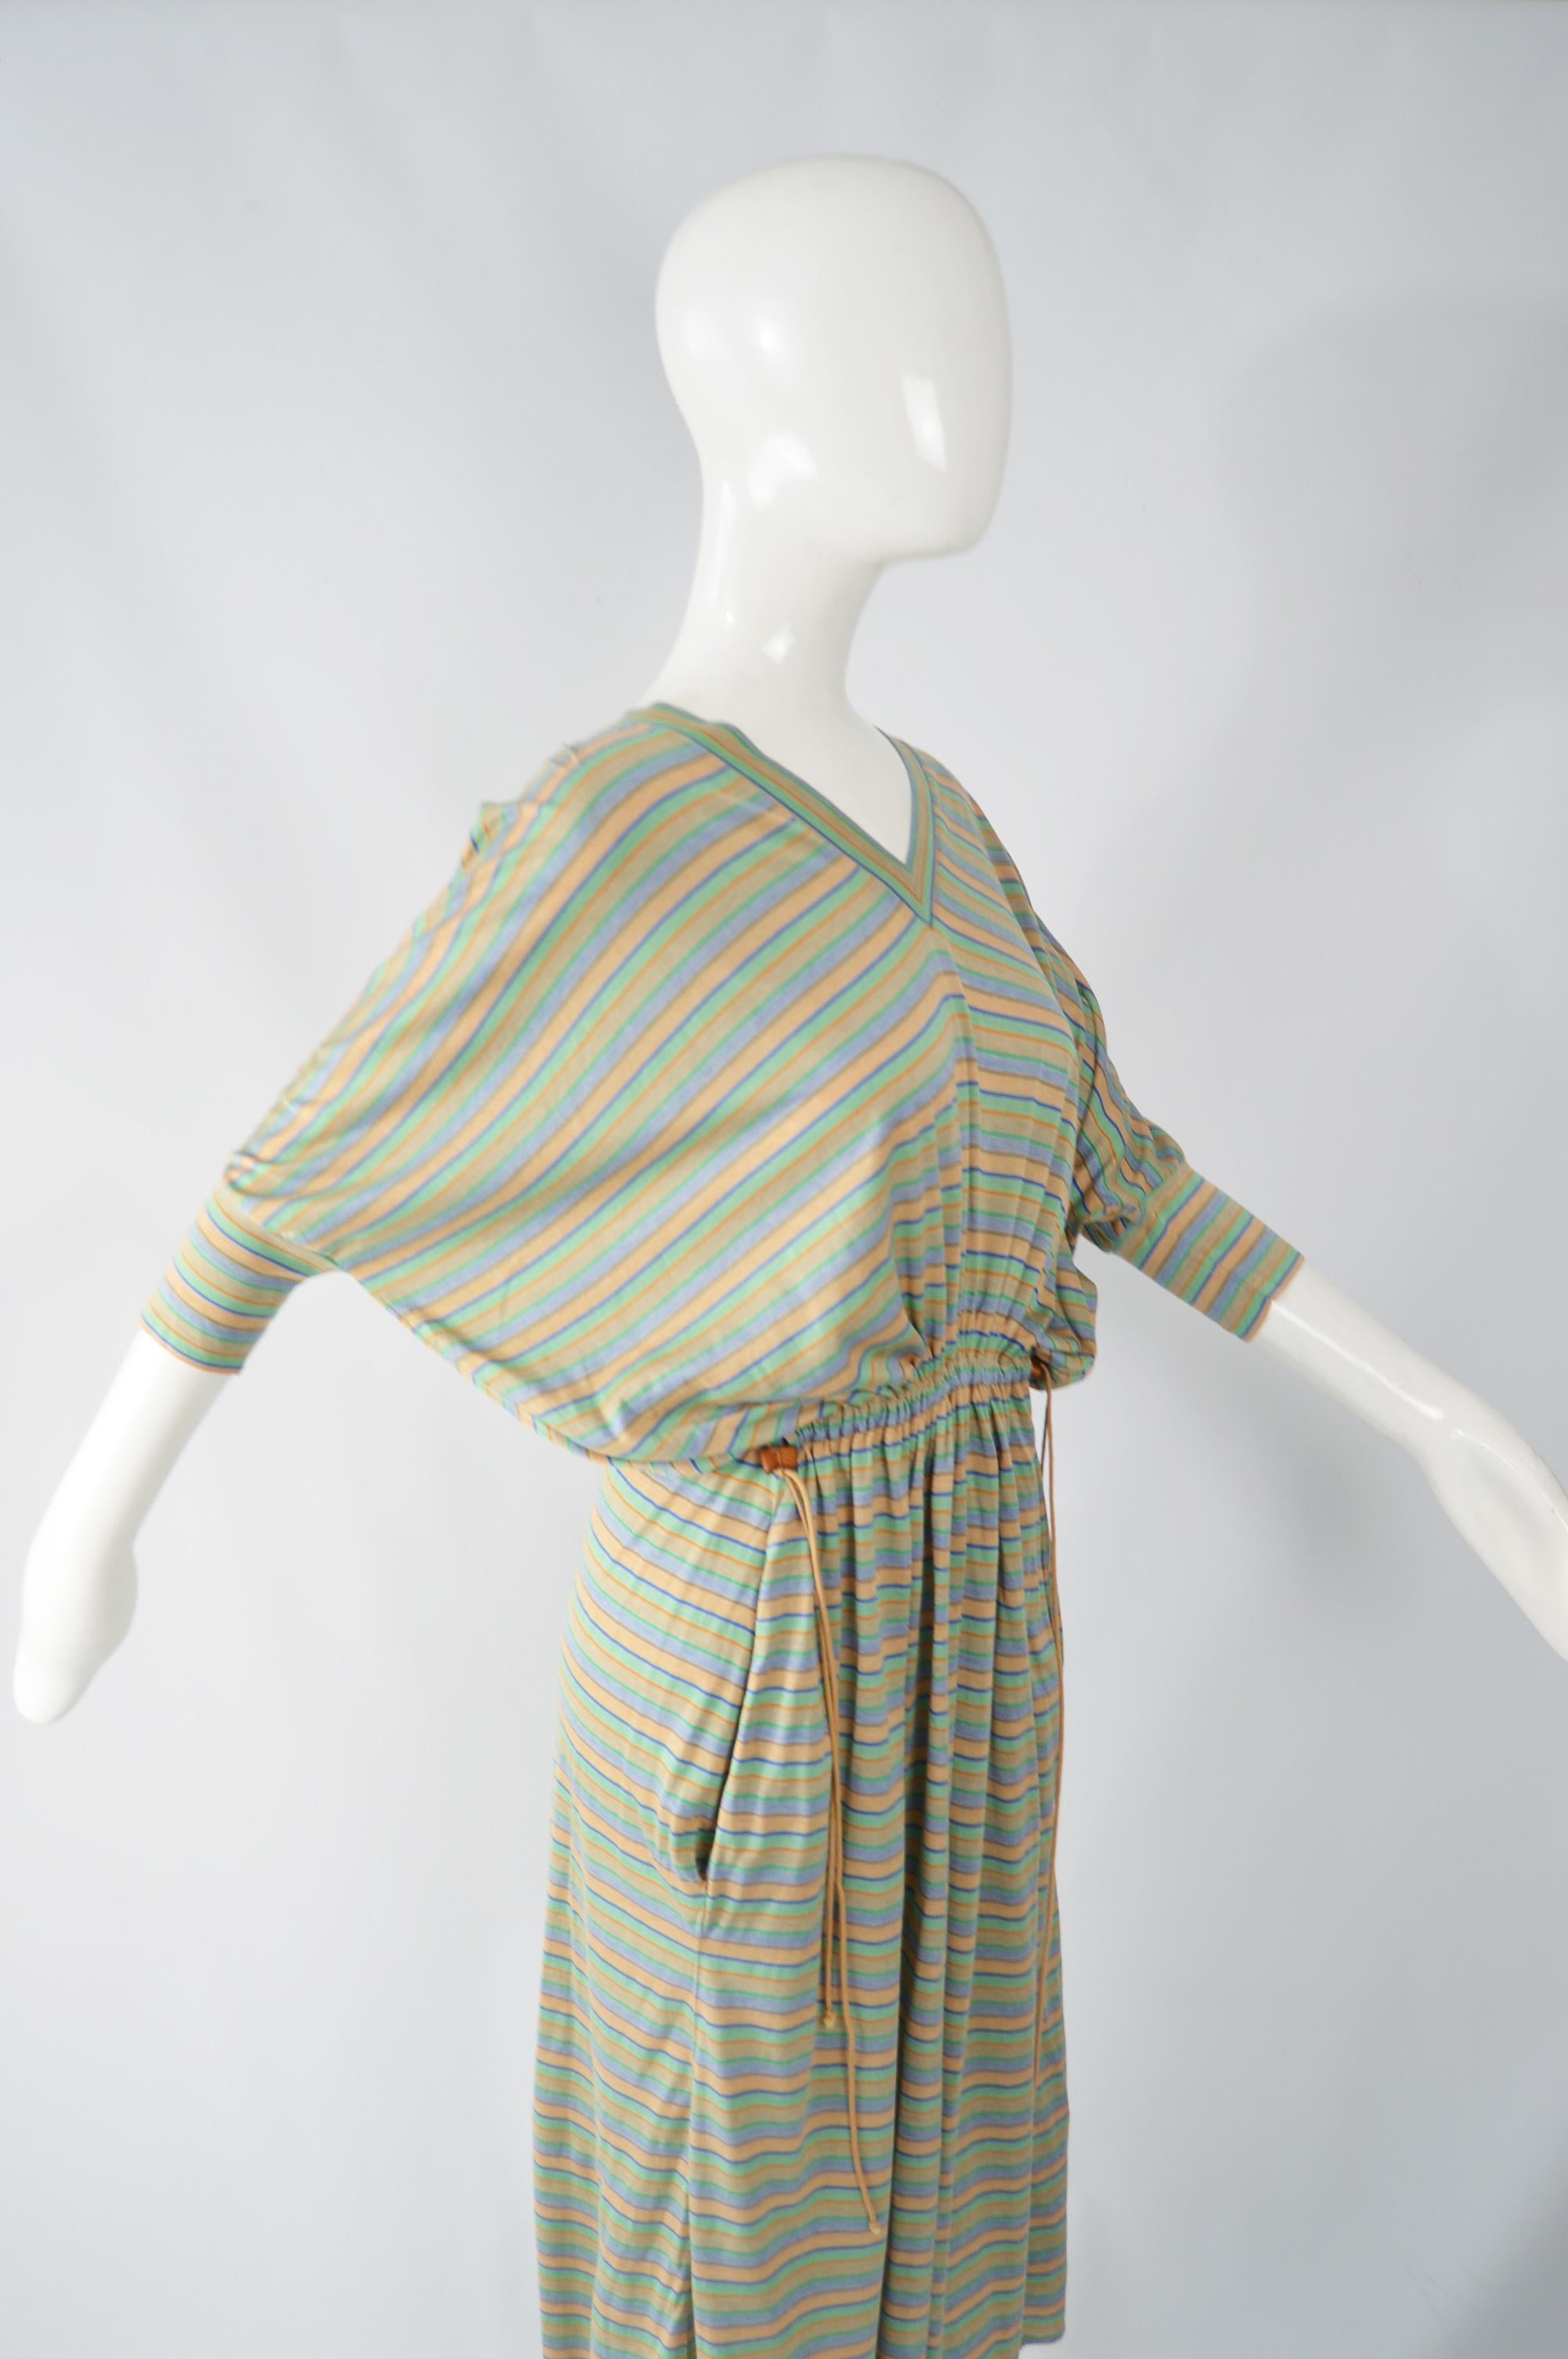 Byblos 1970s Striped Knit Dress In Excellent Condition For Sale In Doncaster, South Yorkshire